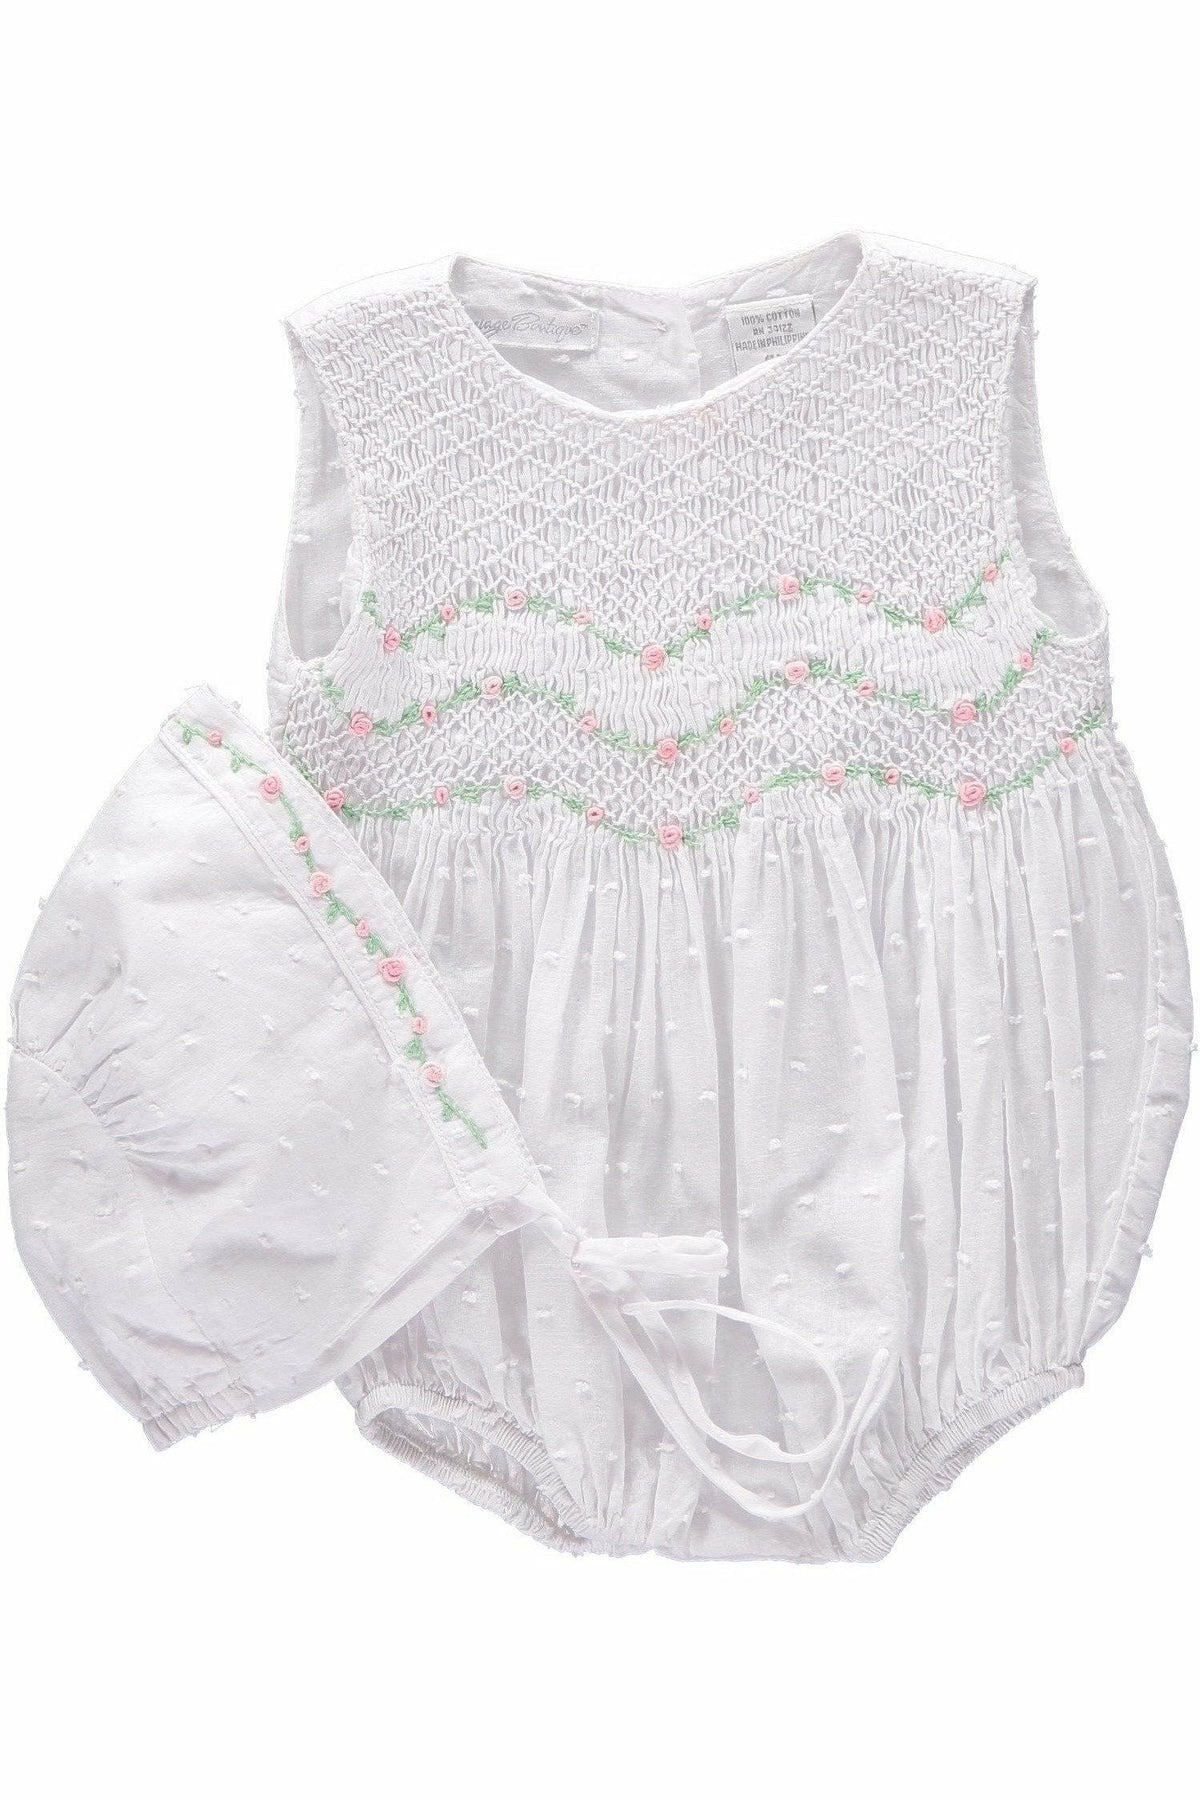 Carriage Boutique Whimsical Baby Girl Bubble Romper W/Bonnet 20016 5103